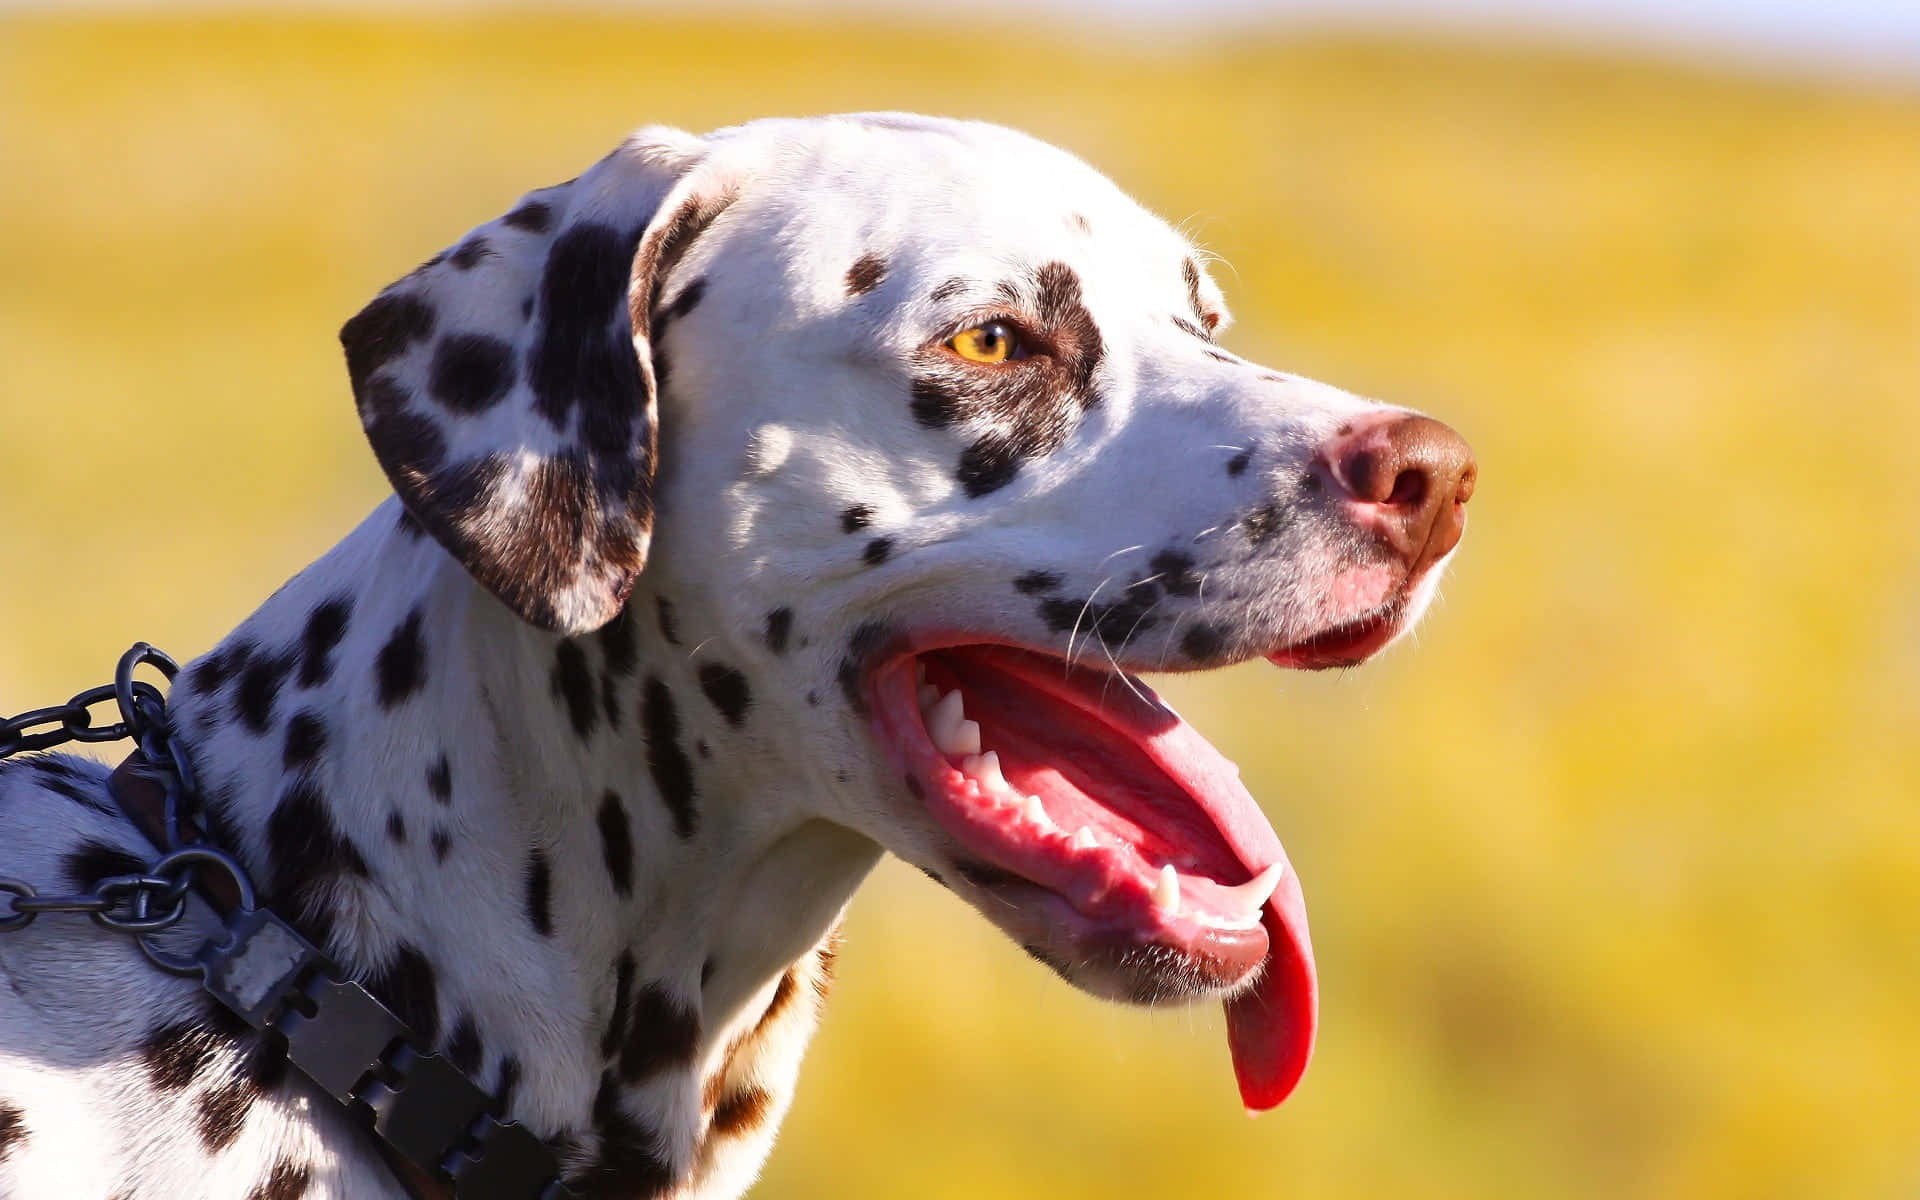 A Dalmatian Loving the Attention -